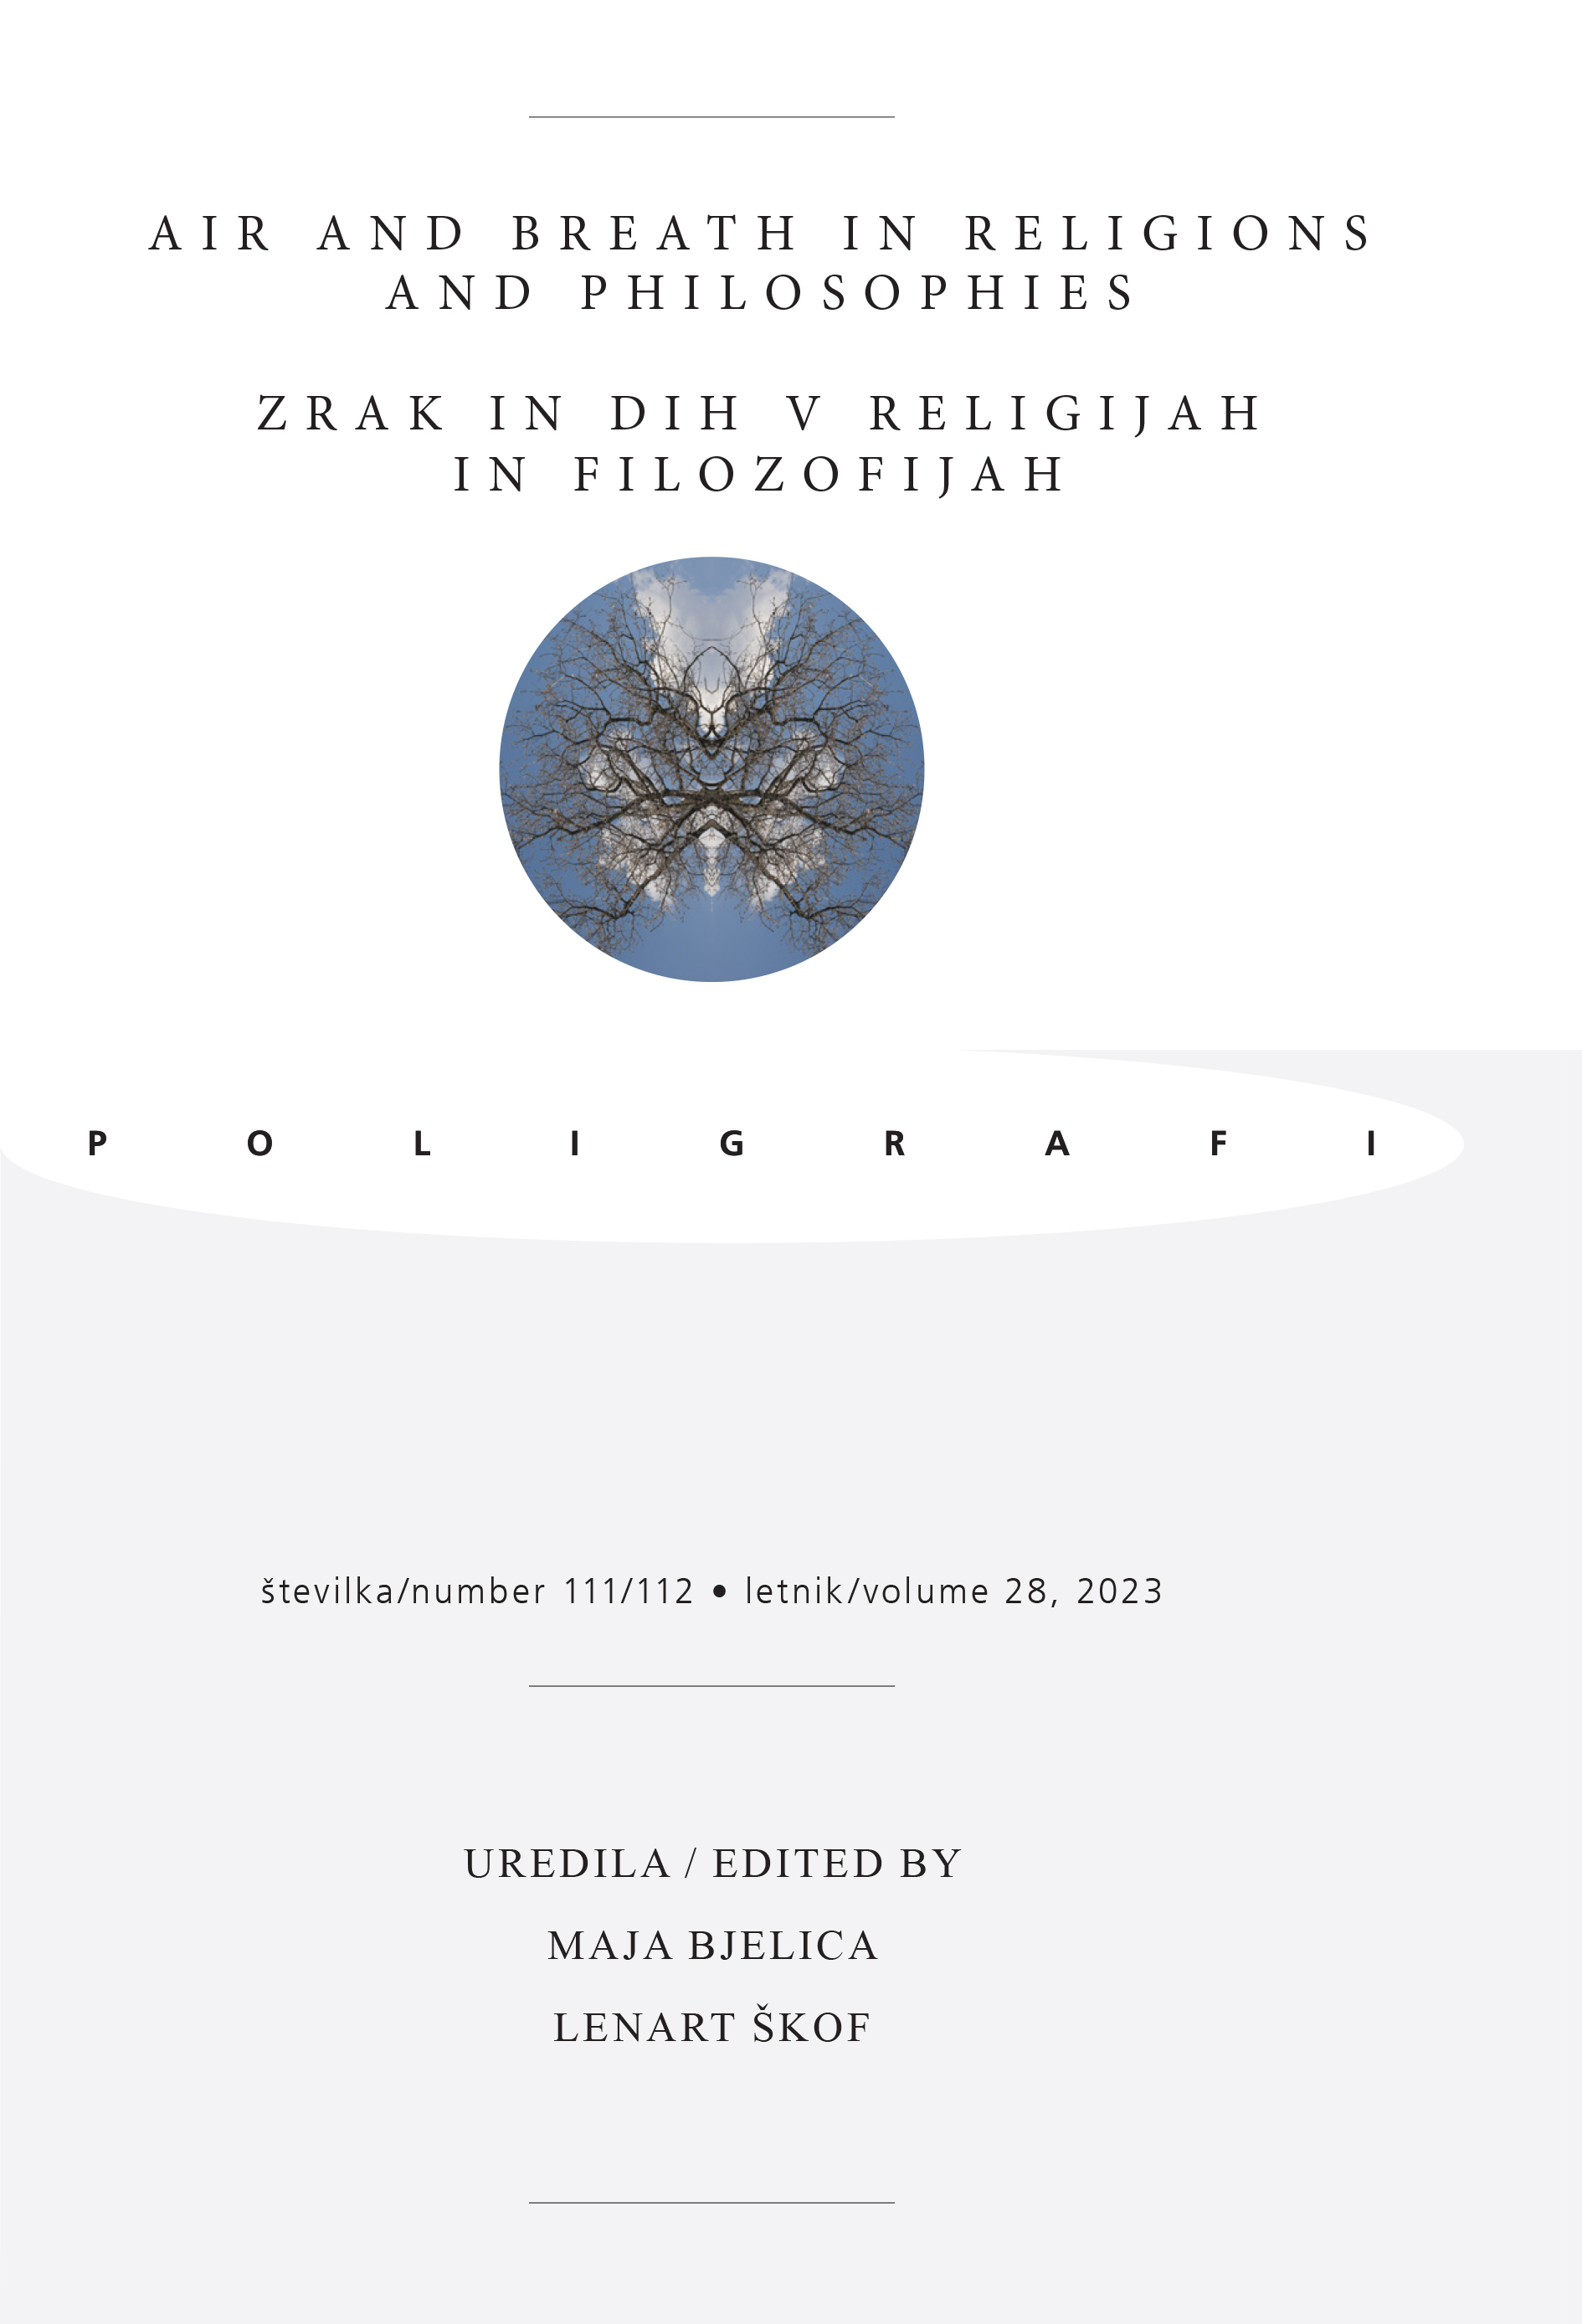 					Poglej Letn. 28 Št. 111/112 (2023): Air and Breath in Religions and Philosophies
				